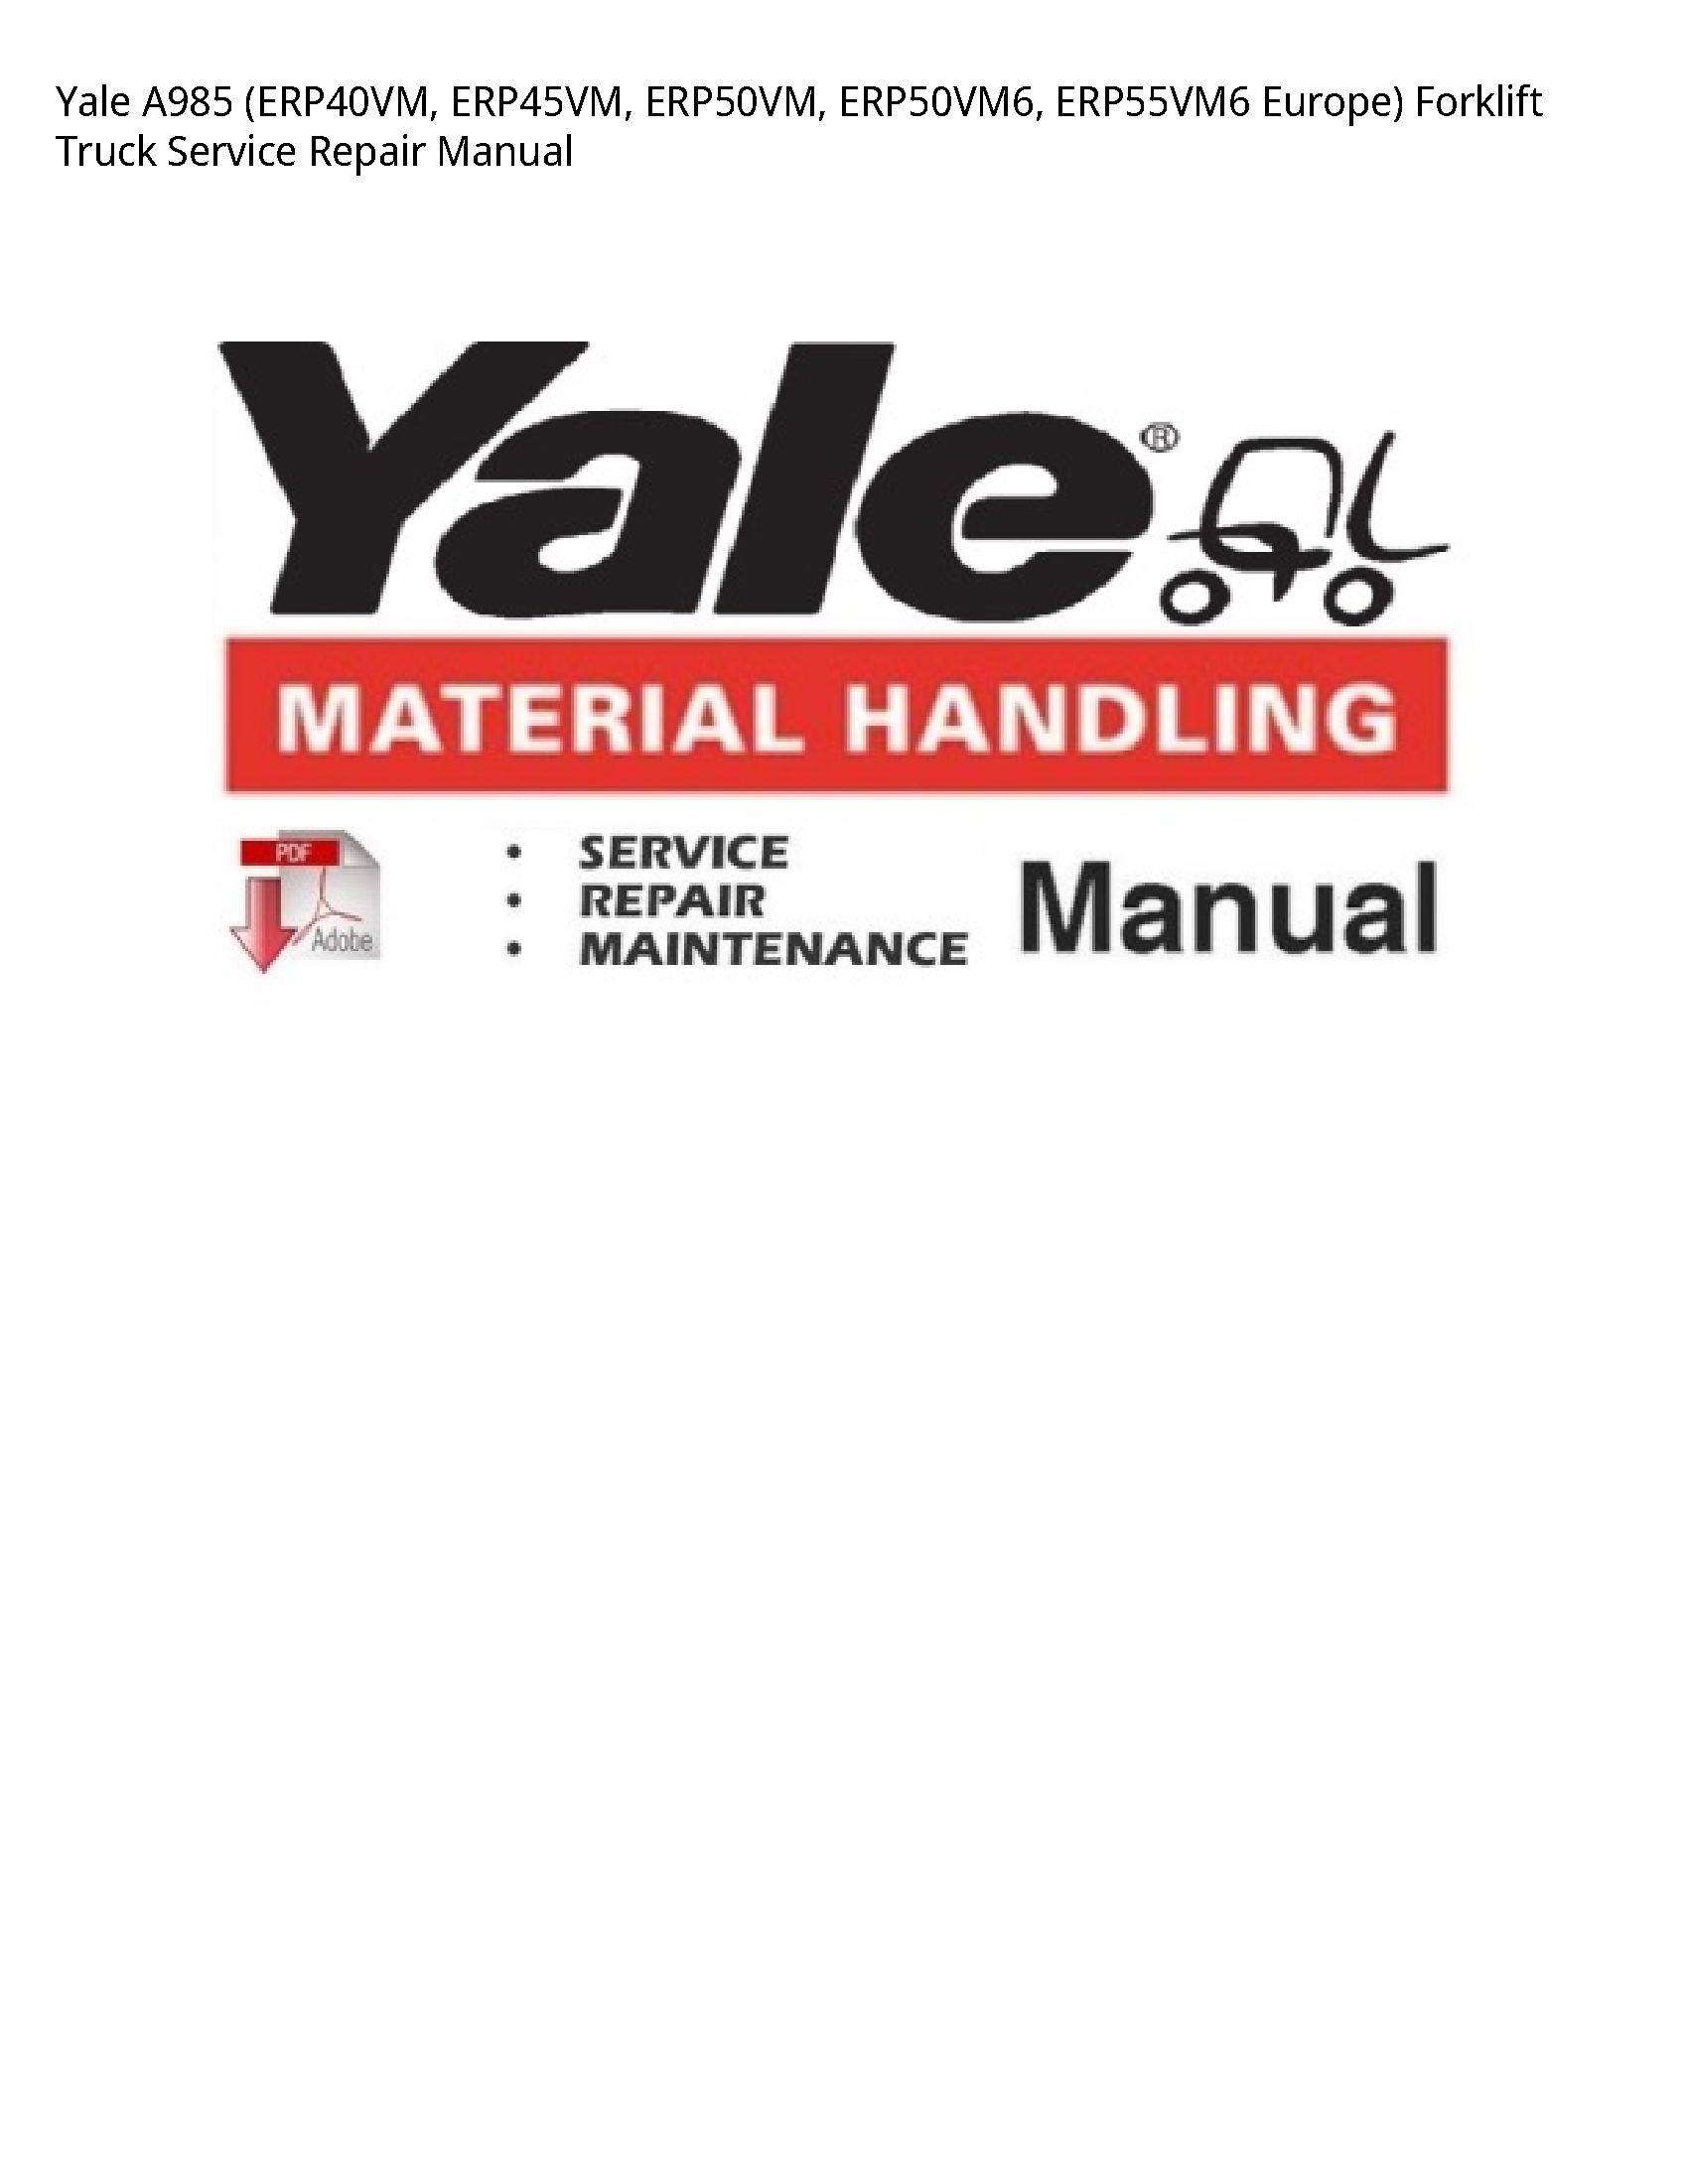 Yale A985 Europe) Forklift Truck manual